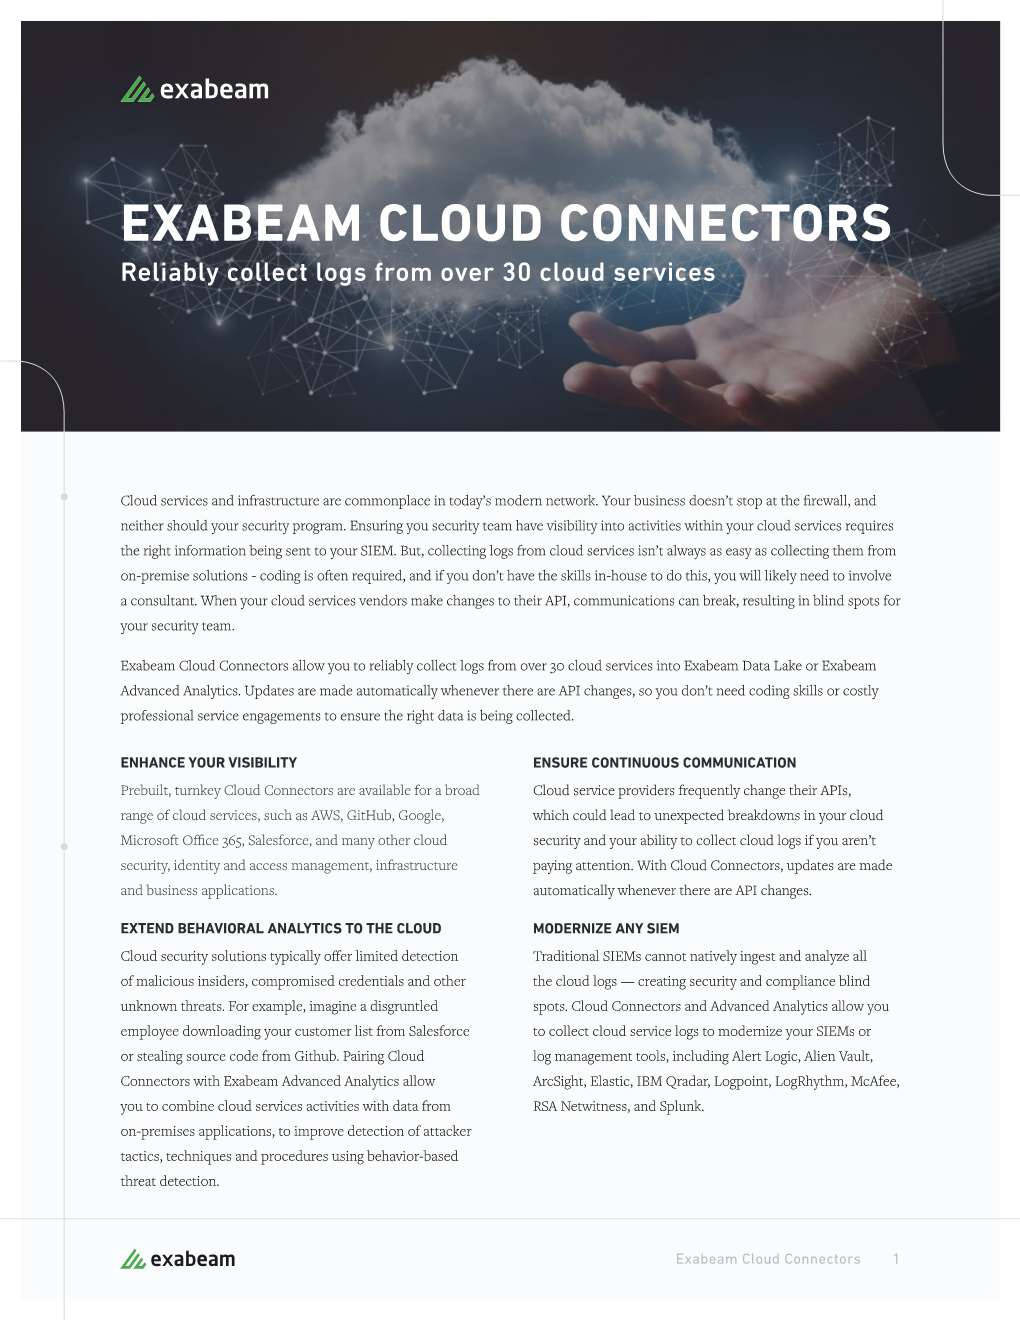 EXABEAM CLOUD CONNECTORS Reliably Collect Logs from Over 30 Cloud Services